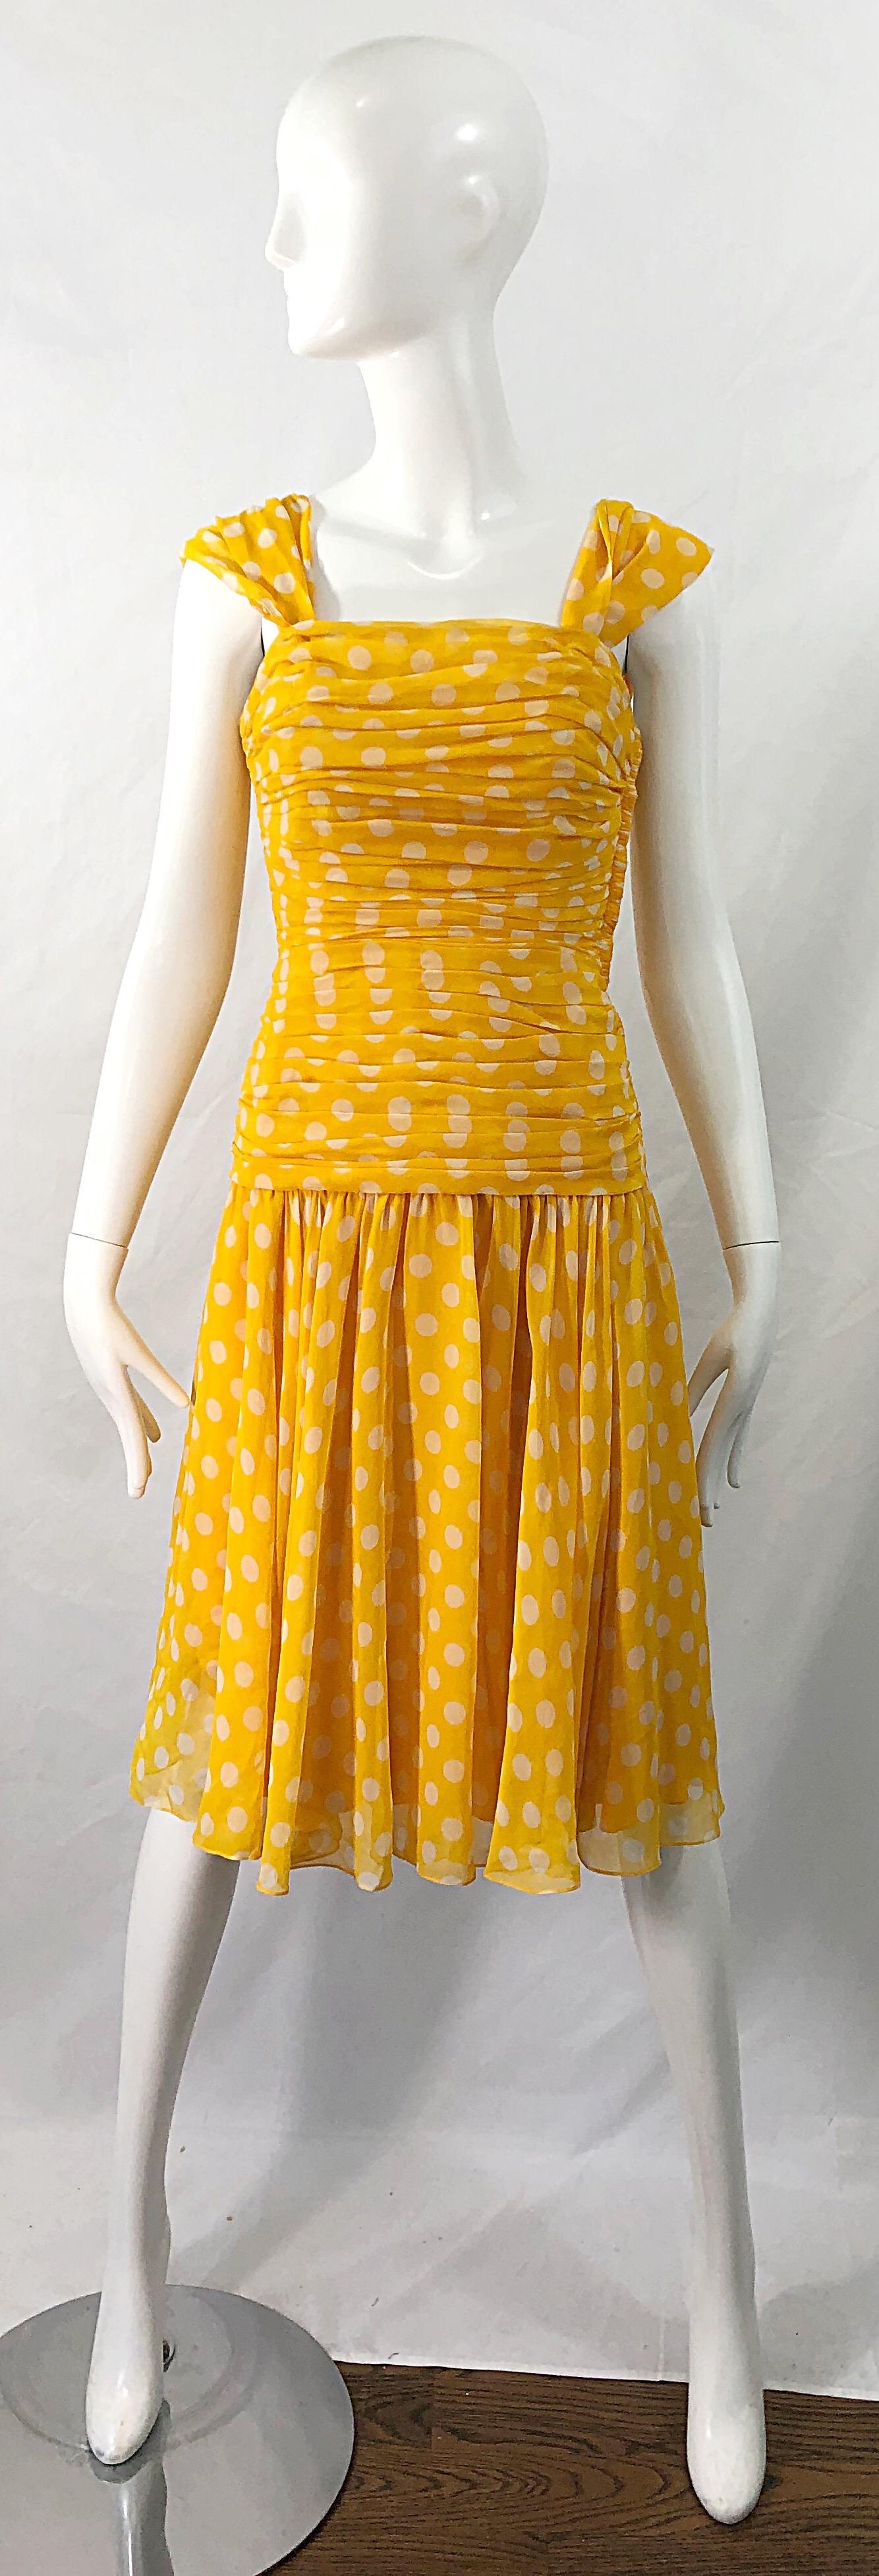 Flirty 1980s ADELE SIMPSON yellow and white silk chiffon polka dot dress ! Features a boned ruched bodice, with a slightly dropped waist. Multiple layers of chiffon on the skirt. Fully lined. Hidden zipper up the side with hook-and-eye closure.